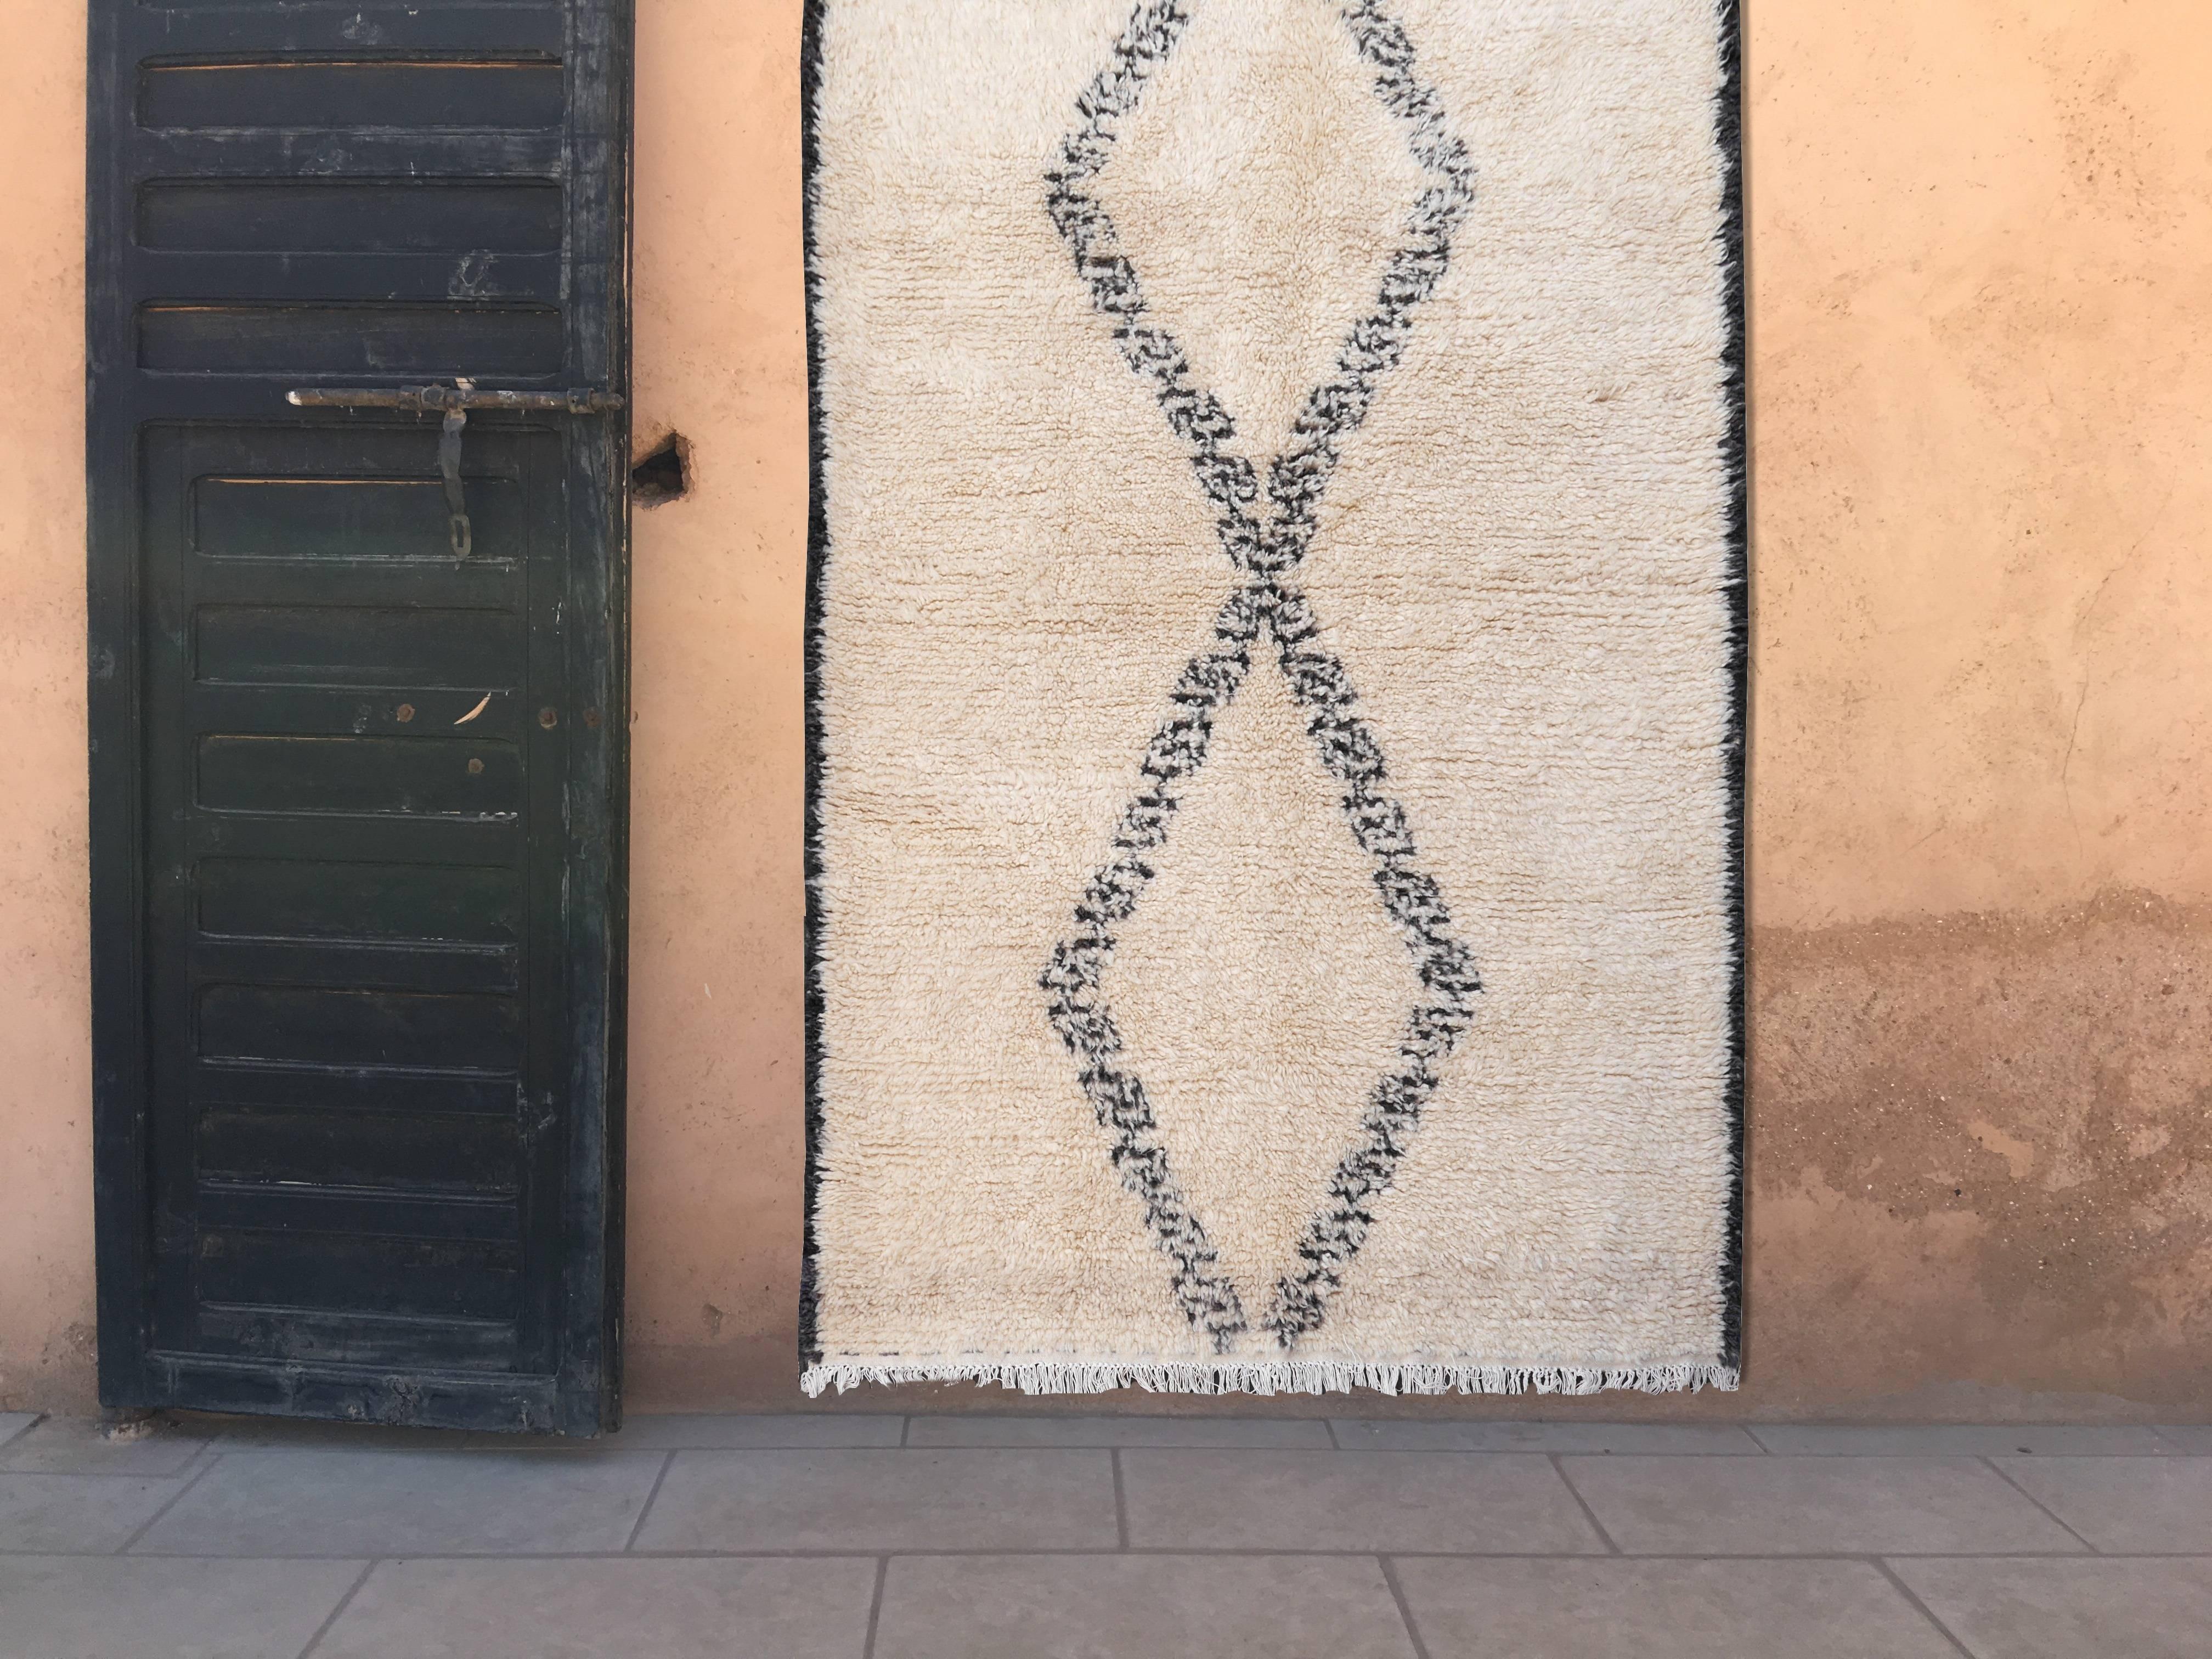 Hand-knotted Beni Ourain Nomad carpet from Morocco
This soft-pile carpet is made of 100% handspun wool and has beautiful two diamond pattern. The pile is very soft and fluffy. The color of the carpet is woolen white and beige (natural wool is never